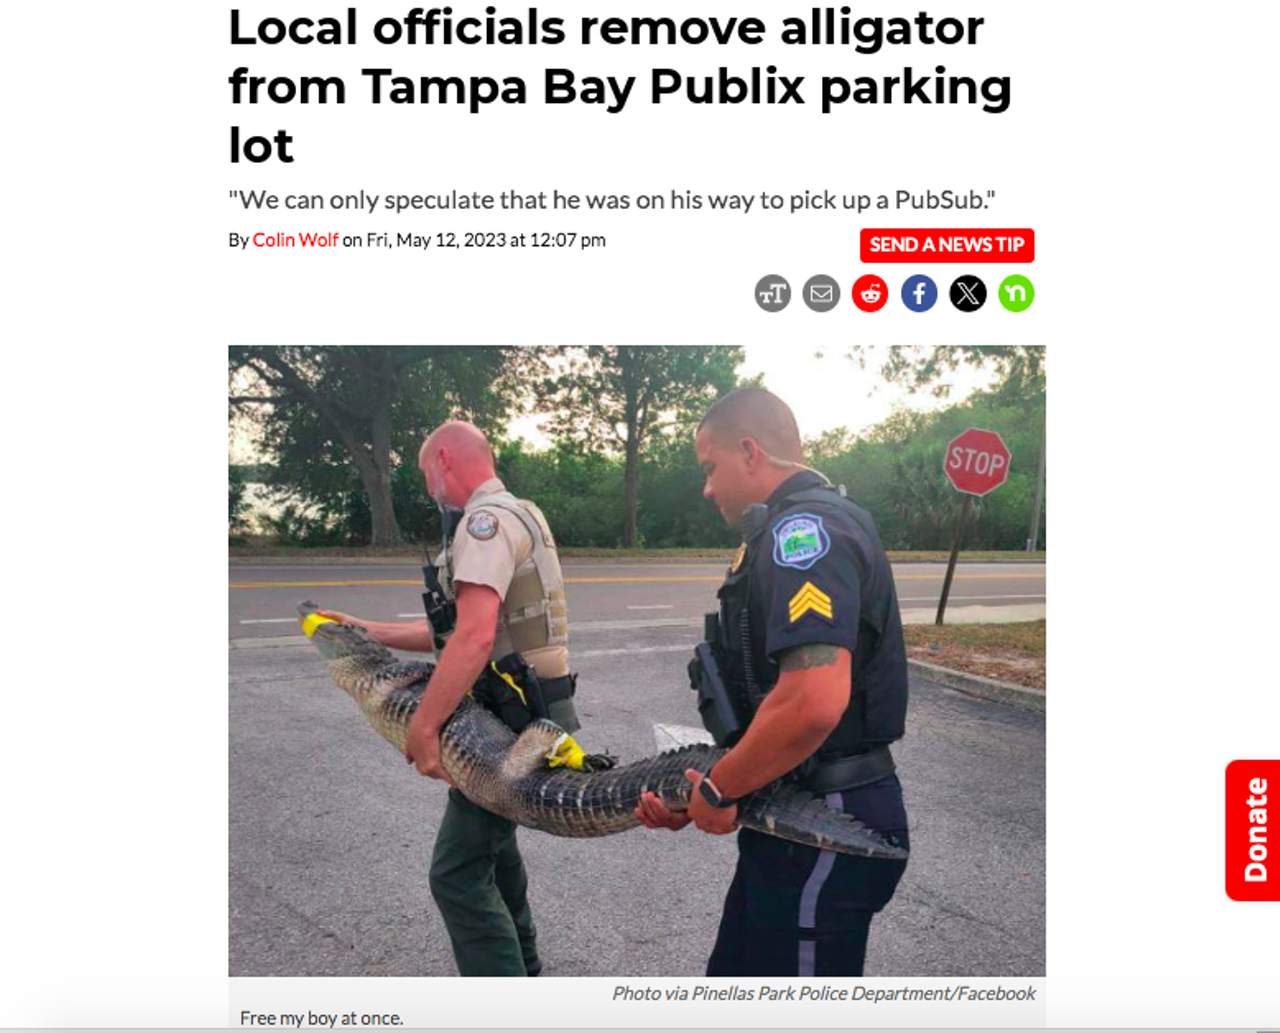 A decent-sized alligator was detained last spring and relocated for trespassing at a Tampa Bay Publix. "We can only speculate that he was on his way to pick up a PubSub," said the police department said in a Facebook post. An officer with the Florida Fish and Wildlife Conservation Commission also responded to the call and helped relocate it to a nearby body of water. Read the full story here.